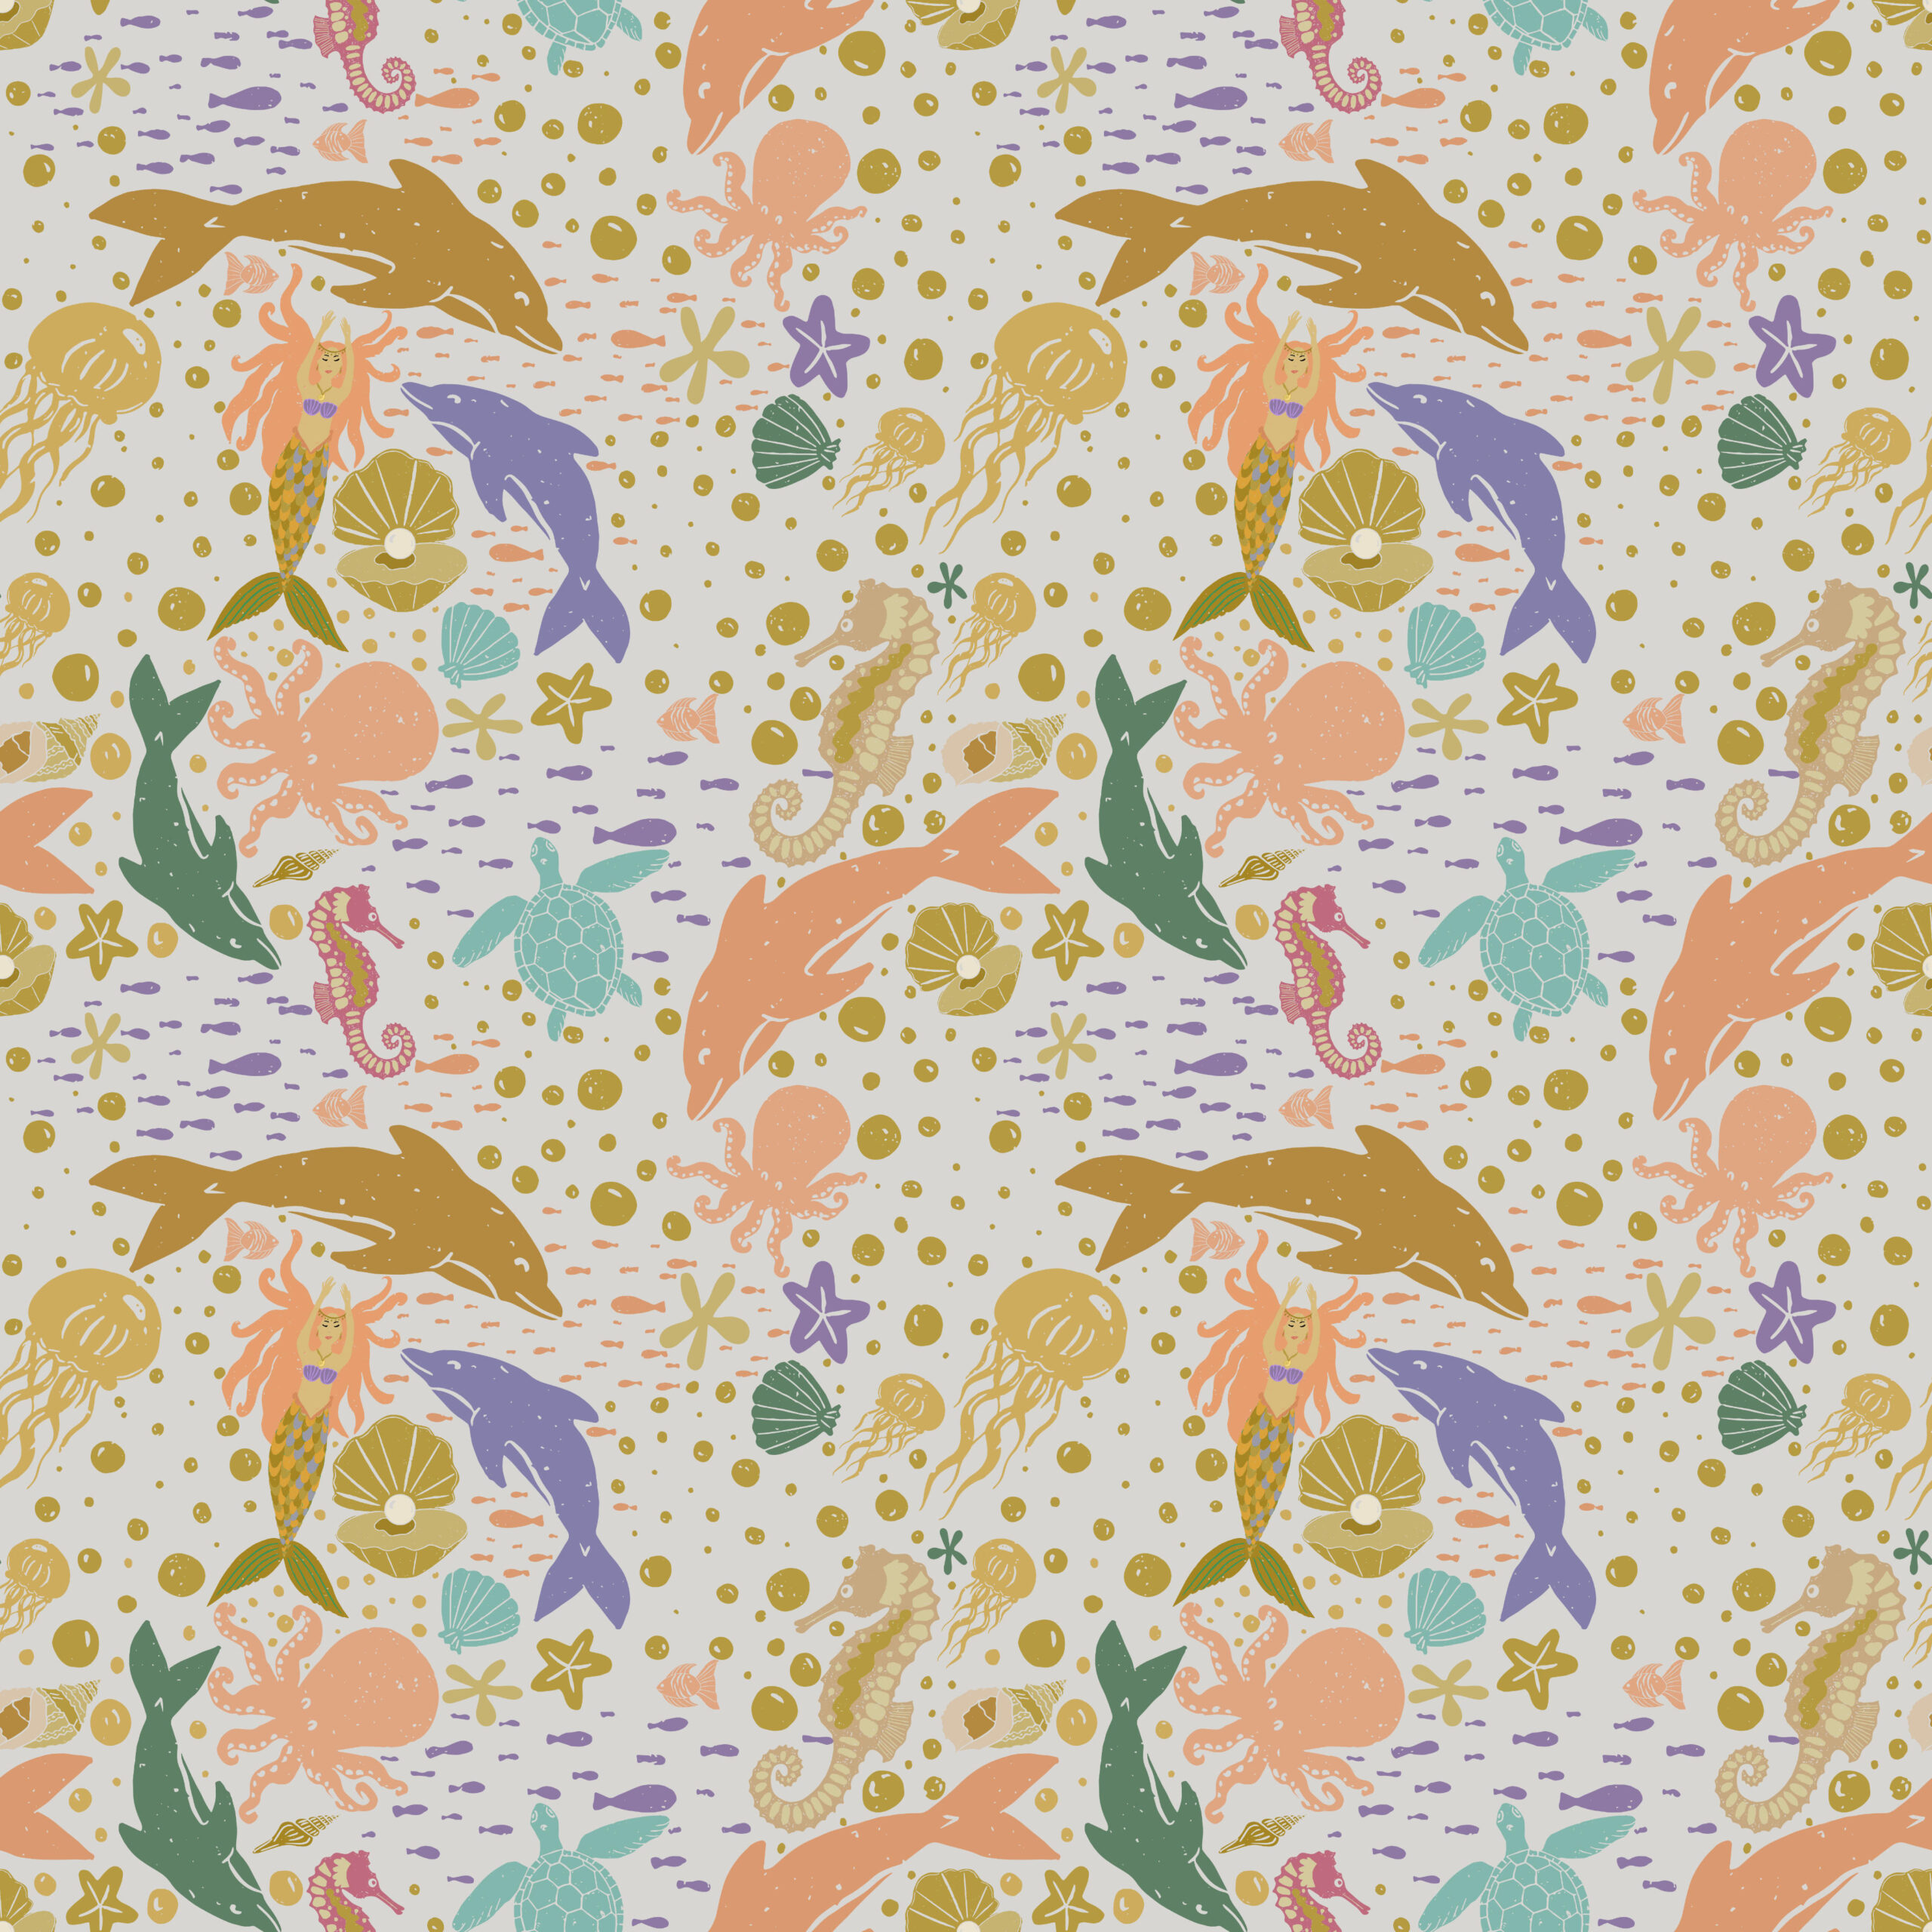 Repeating Pattern showing various ocean life and fantasy creatures like mermaids, dolphins, sea turtles, clams with pearls, octupus, sea of fish and sea shells.